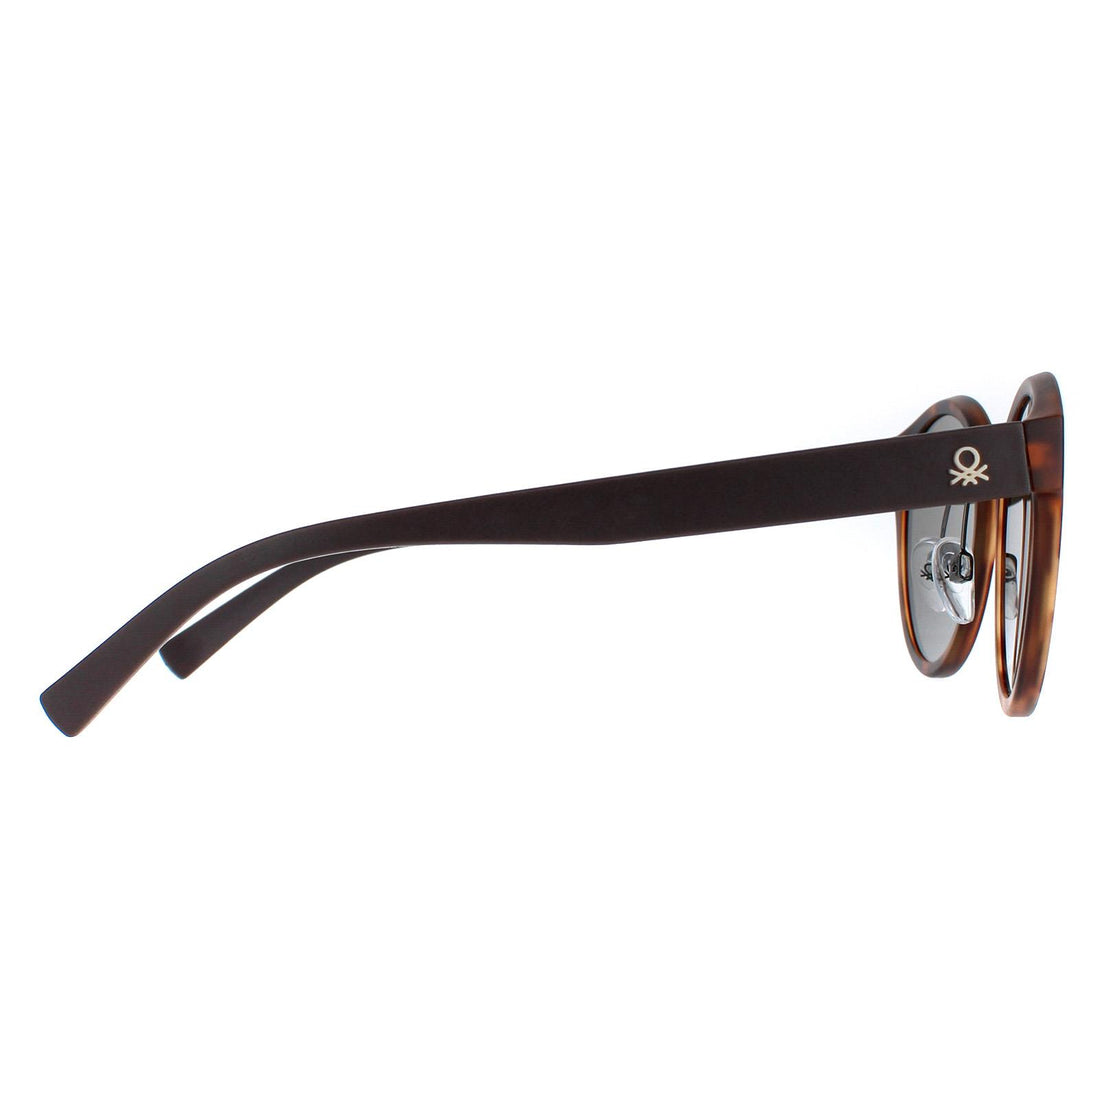 Benetton Sunglasses BE5009 112 Brown Gold Mirrored